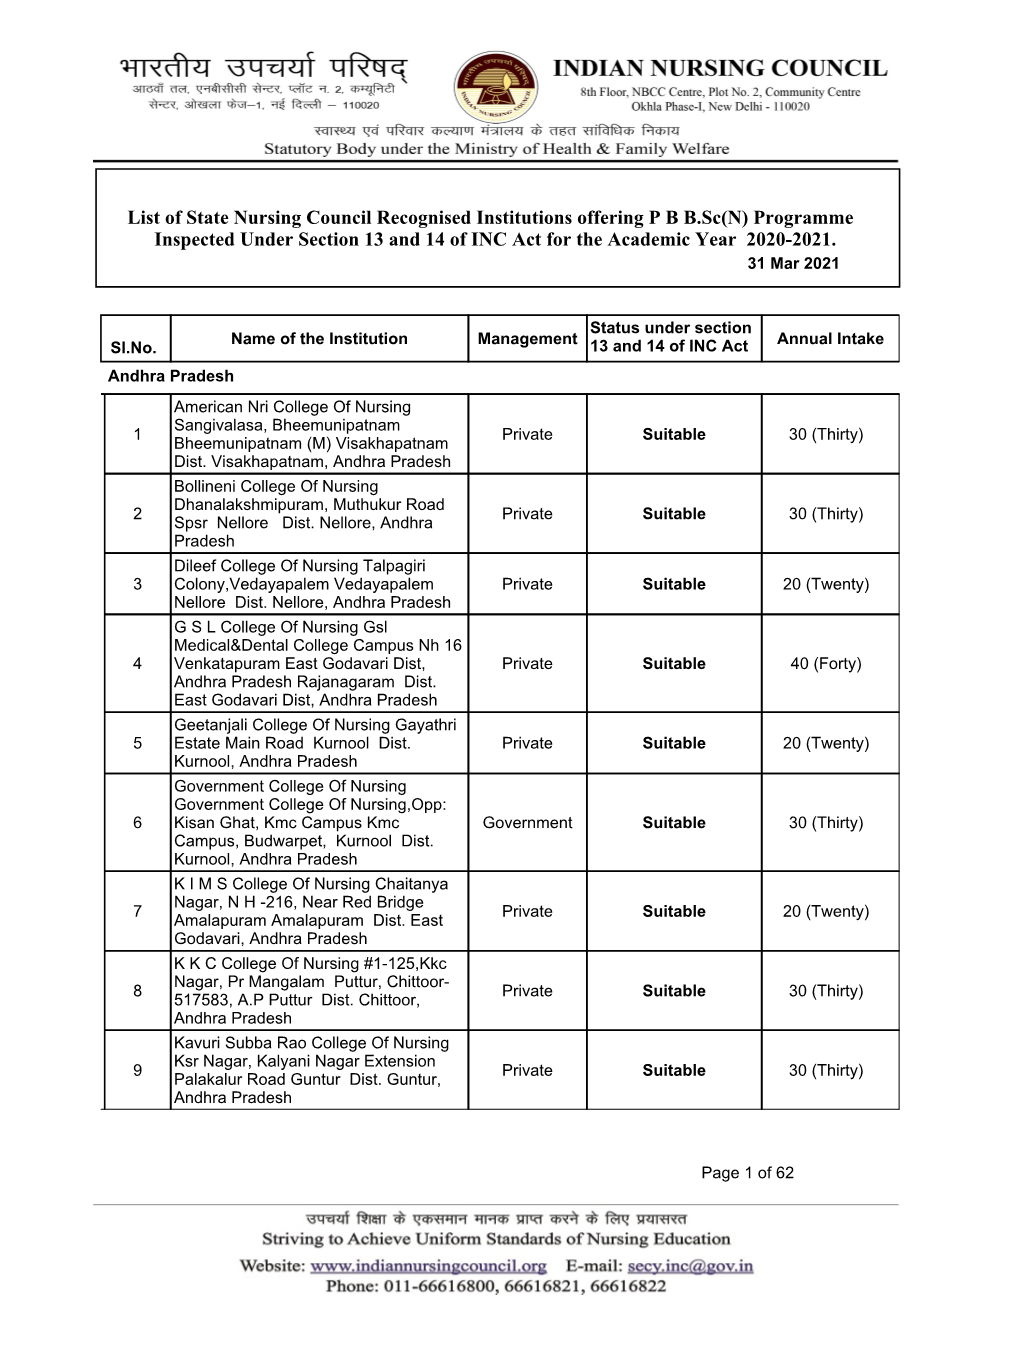 List of State Nursing Council Recognised Institutions Offering PB